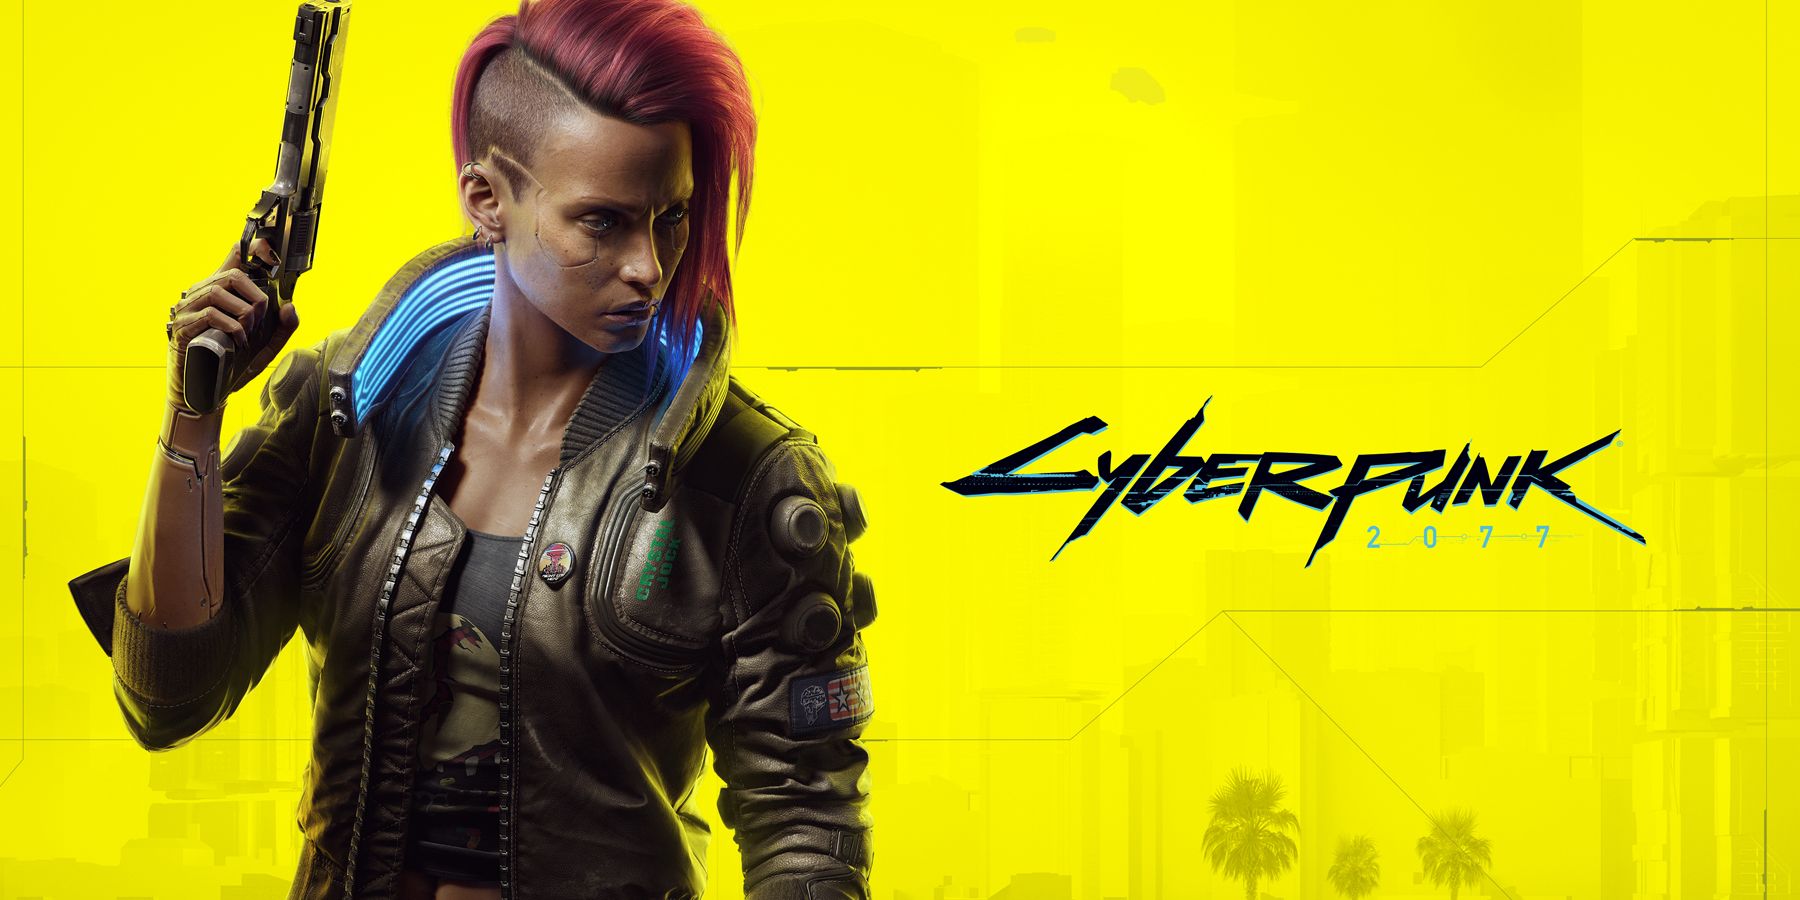 Cybepunk 2077 title on yellow with female player character